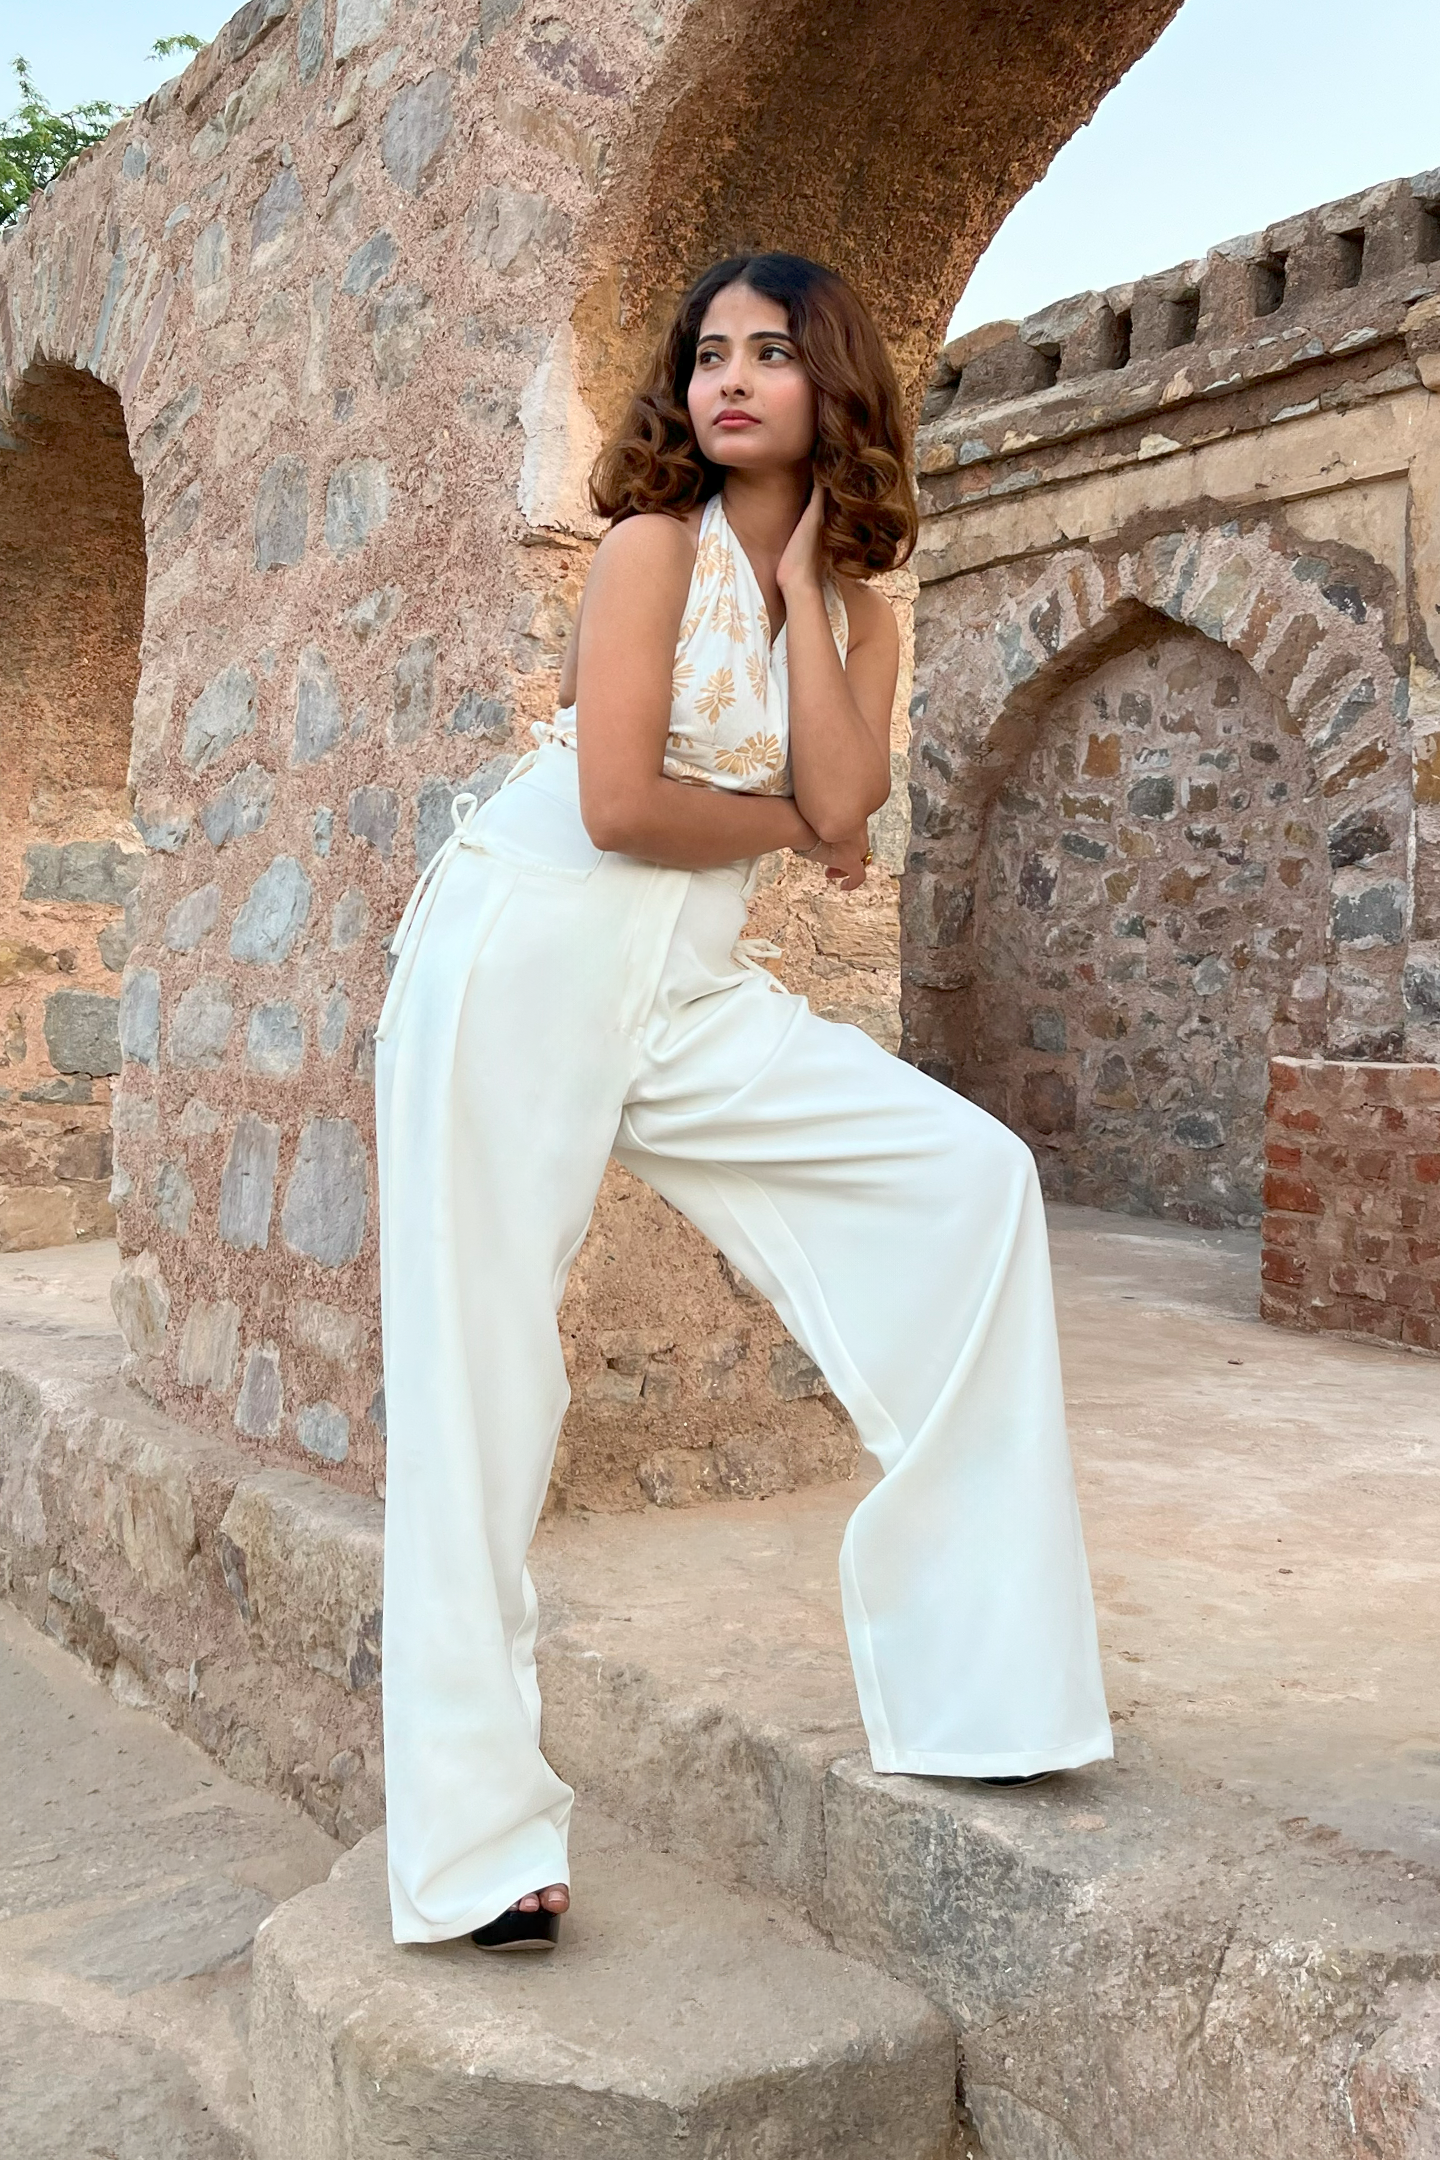 A pair of Ronazen loose fit white pocketed pants displayed against a neutral background. The pants are designed with a relaxed and comfortable fit, featuring multiple pockets. The fabric appears light and breathable, suitable for casual wear. The overall look is simplistic and versatile, ideal for a variety of outfits